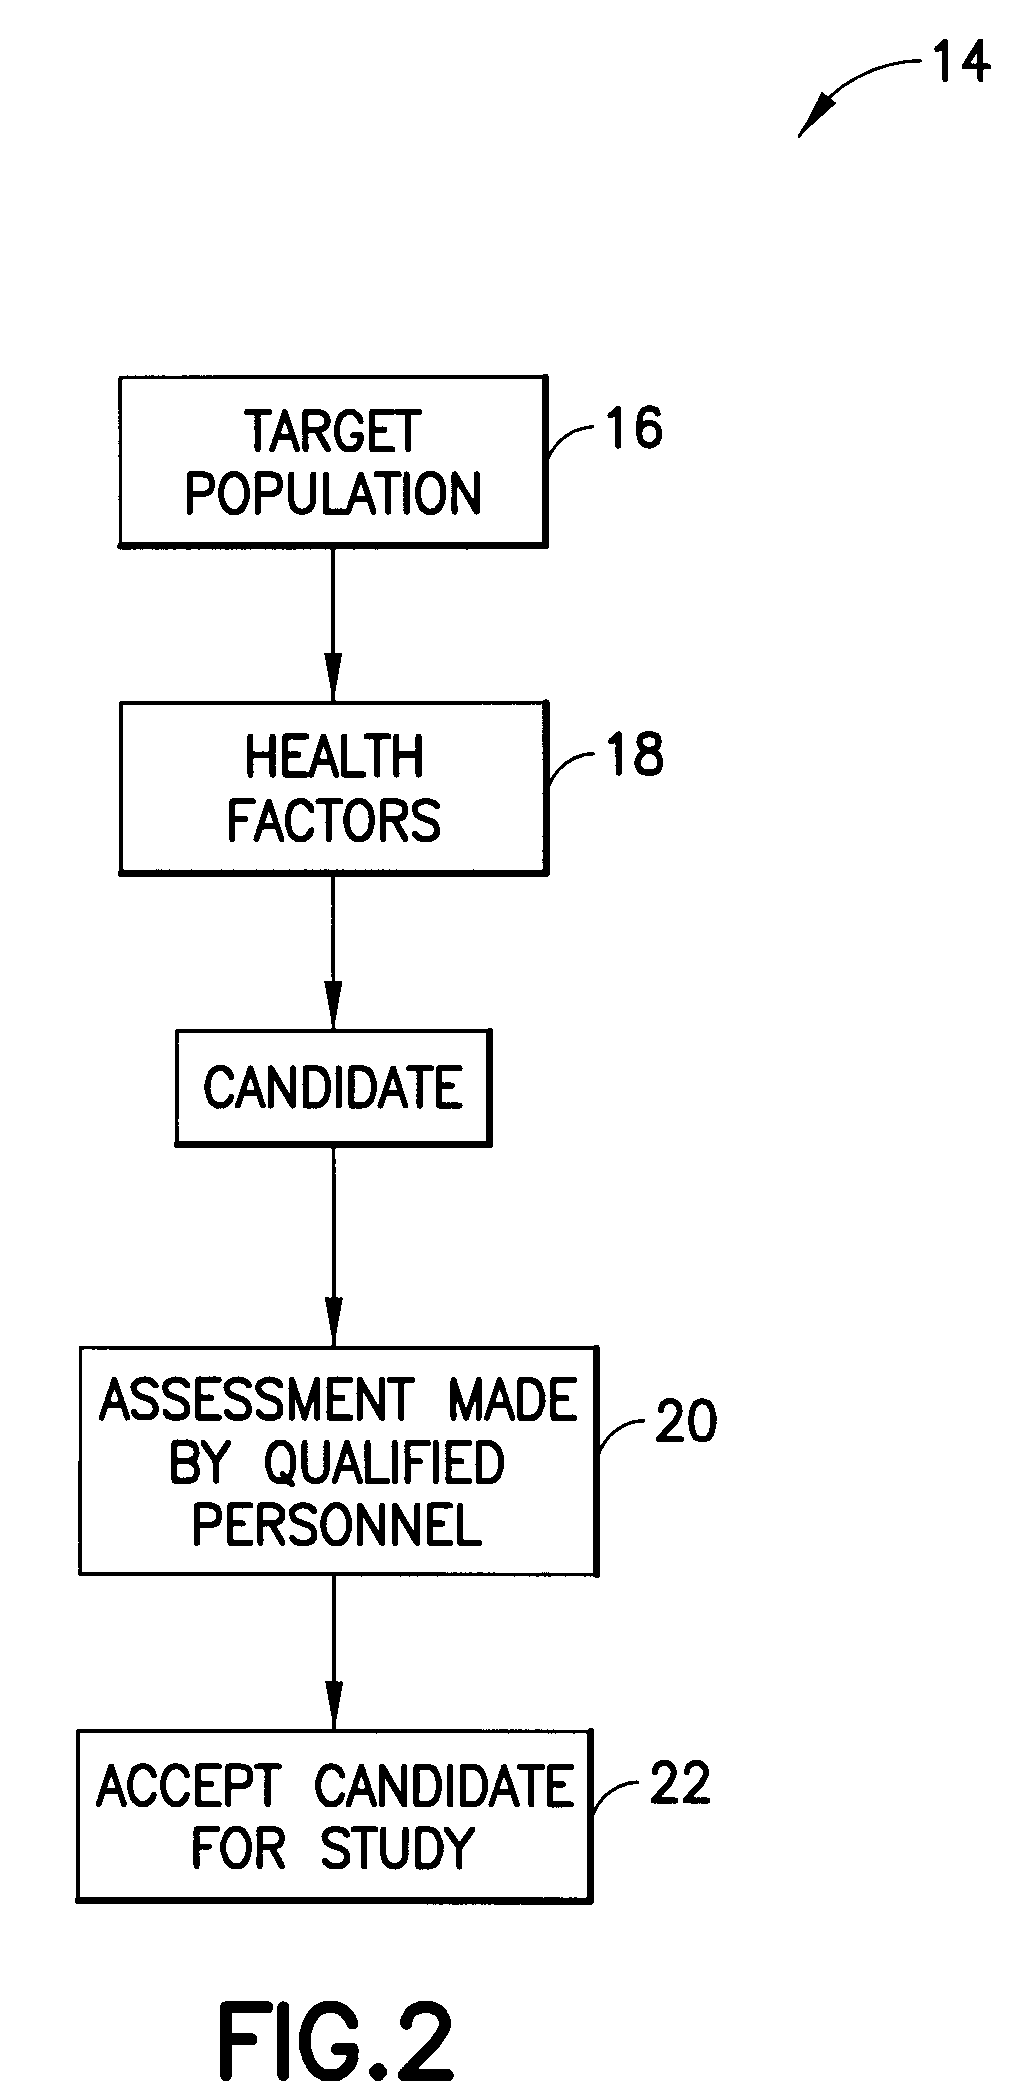 Image analysis processes and methods for the evaluation of tampon performance